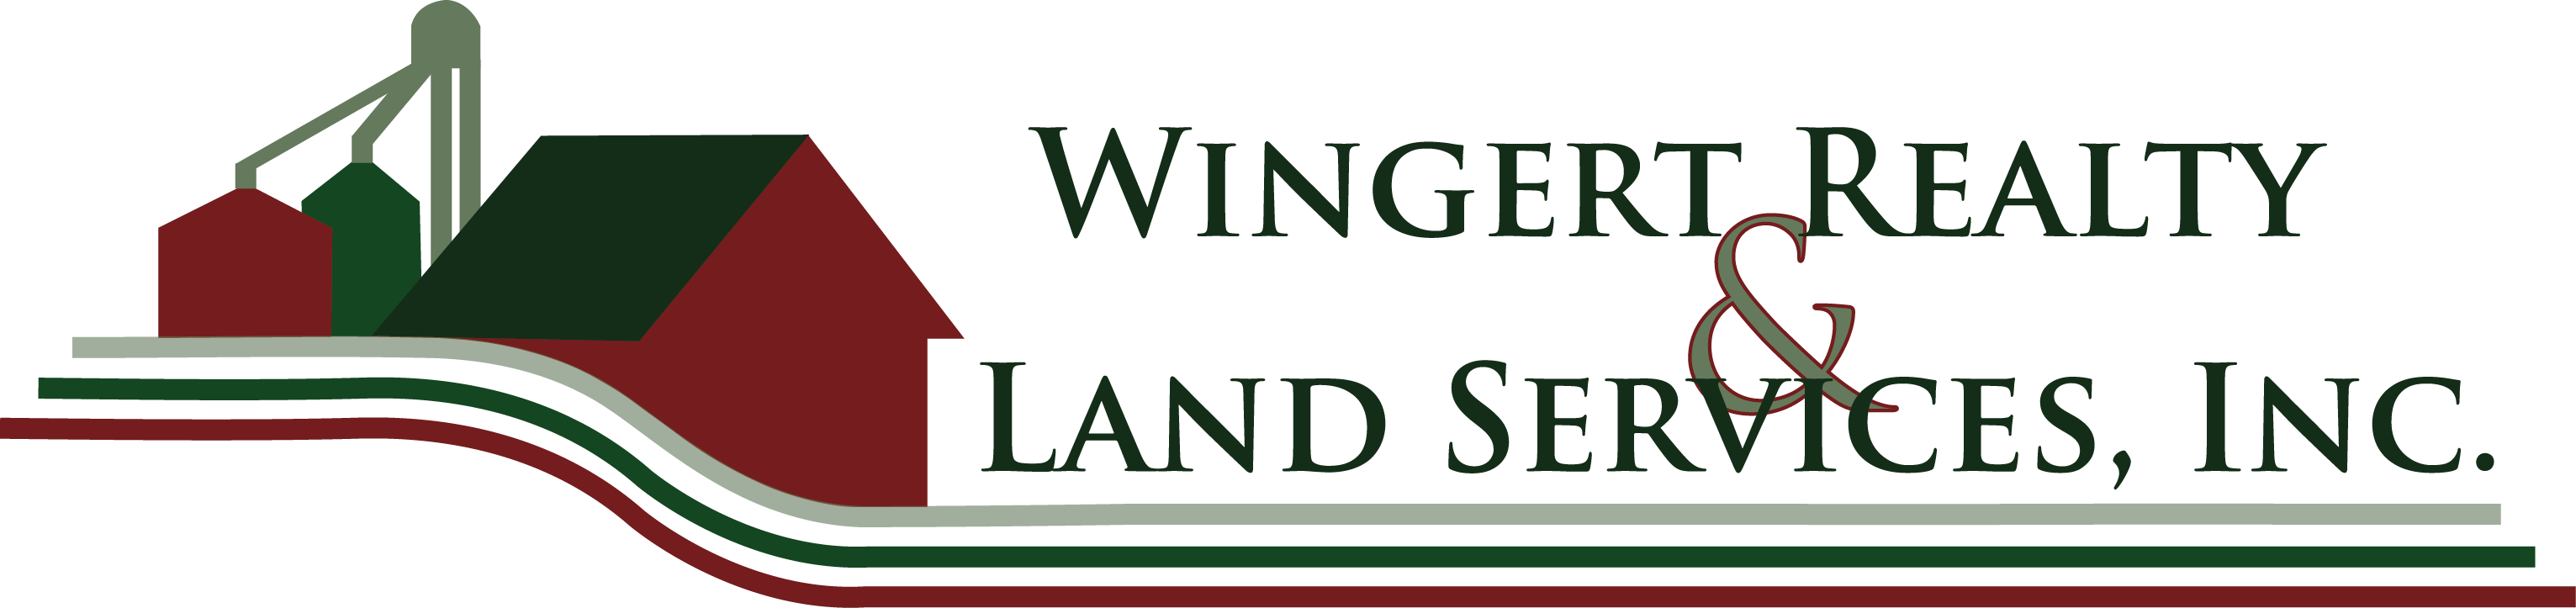 Wingert Realty & Land Services